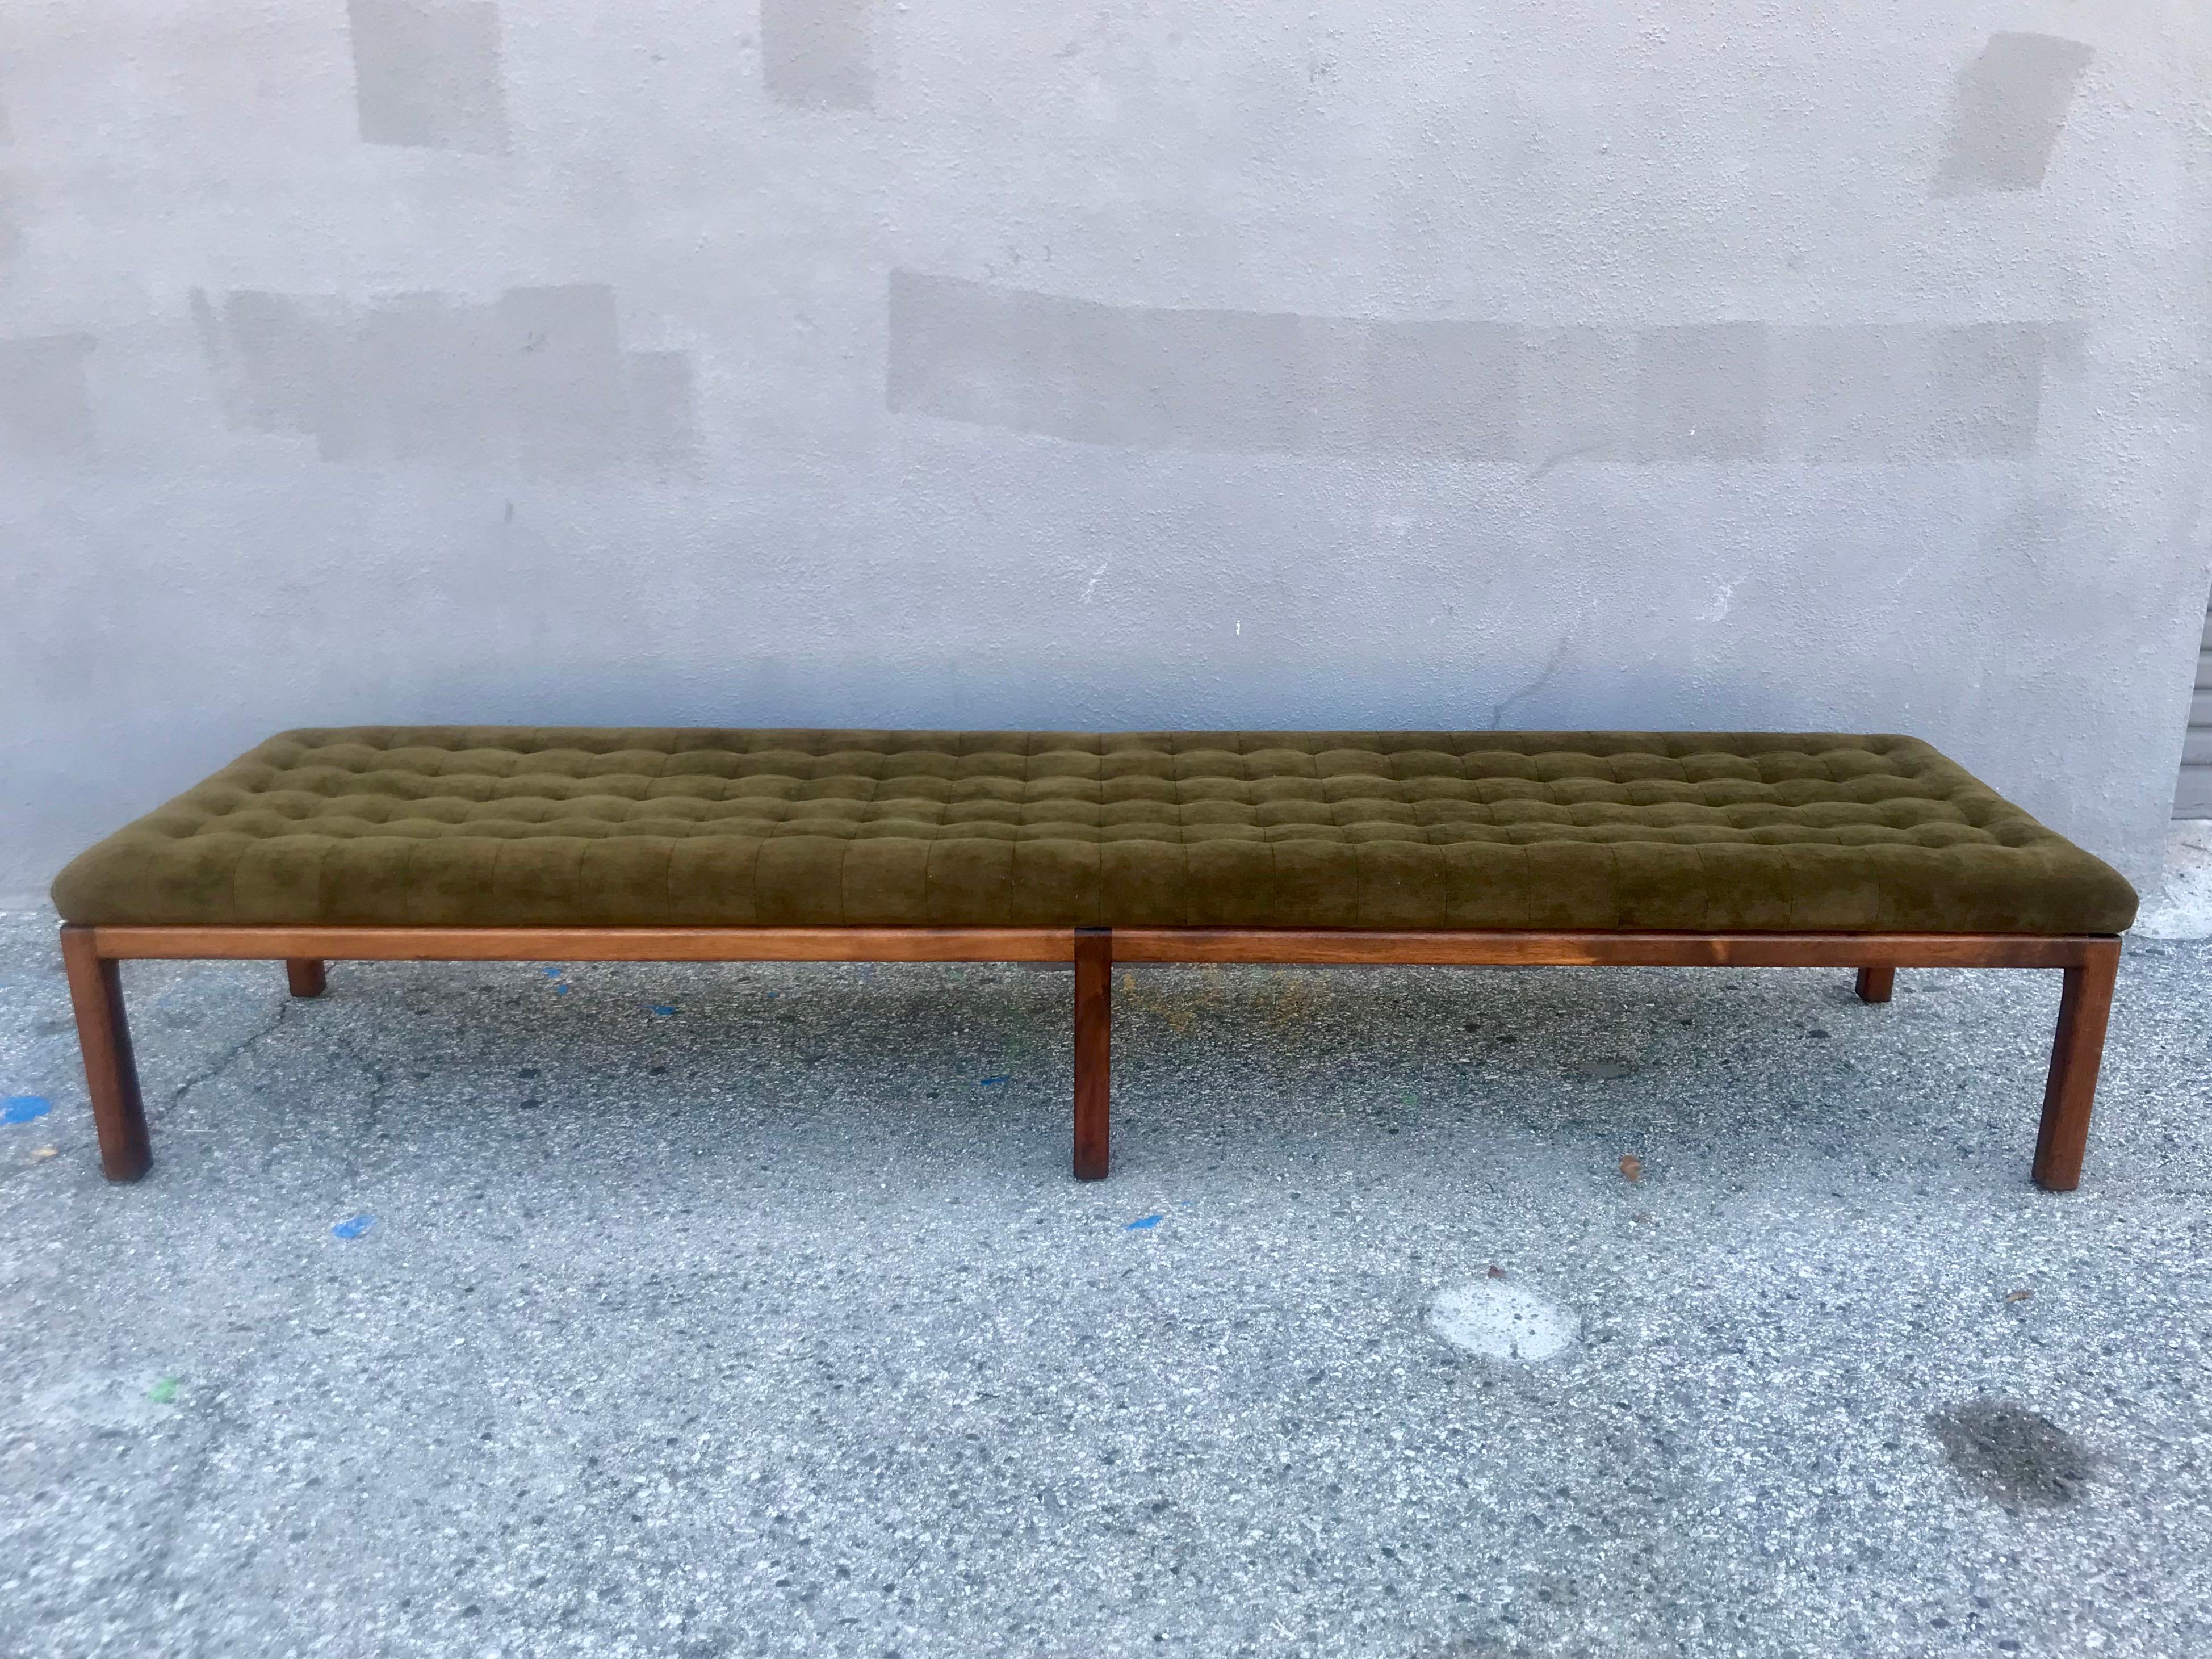 Great modernist design.
Minimalist low profile tufted upholstery with no buttons.
Nice warm moss green mohair fabric.
Clean solid walnut structure.
Original vintage condition.
No damage or repairs.
Some barely visible minor scuffs and nicks on the